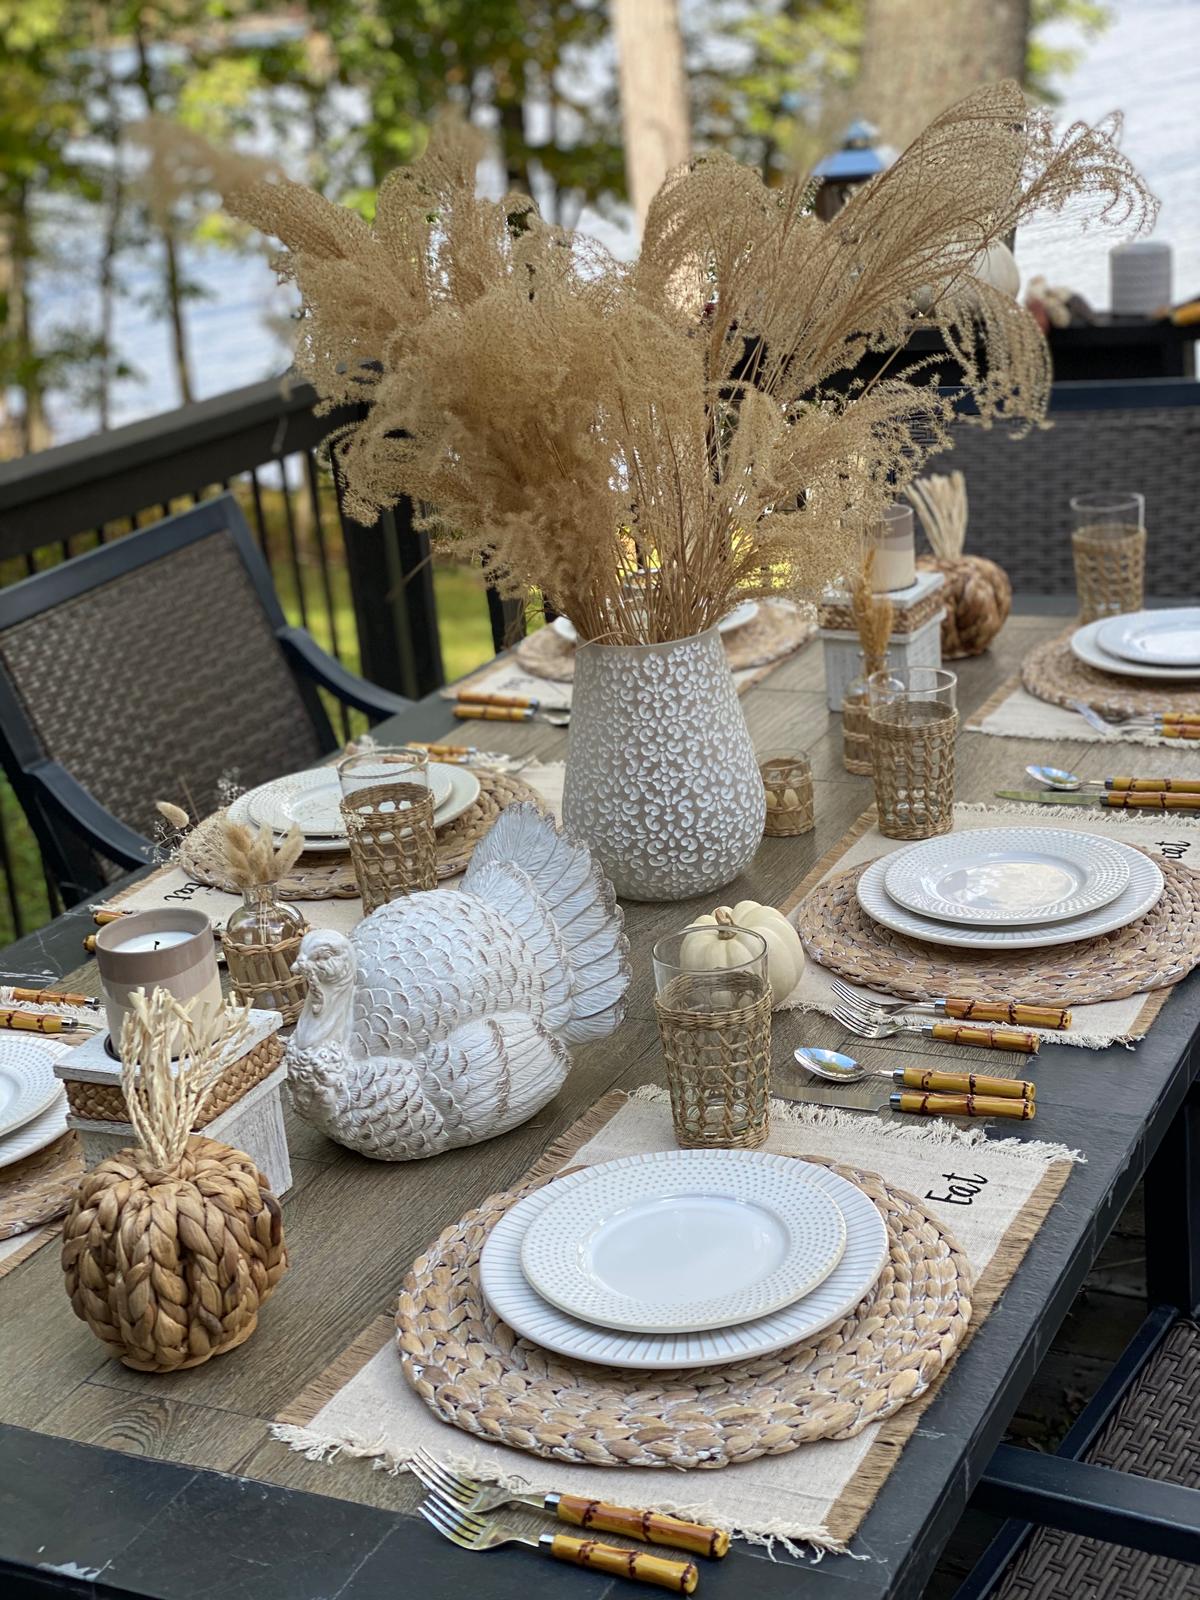 Neutral colors and earthy textures contribute to this natural, simple table decor. (Courtesy of Yelena Oleynik)